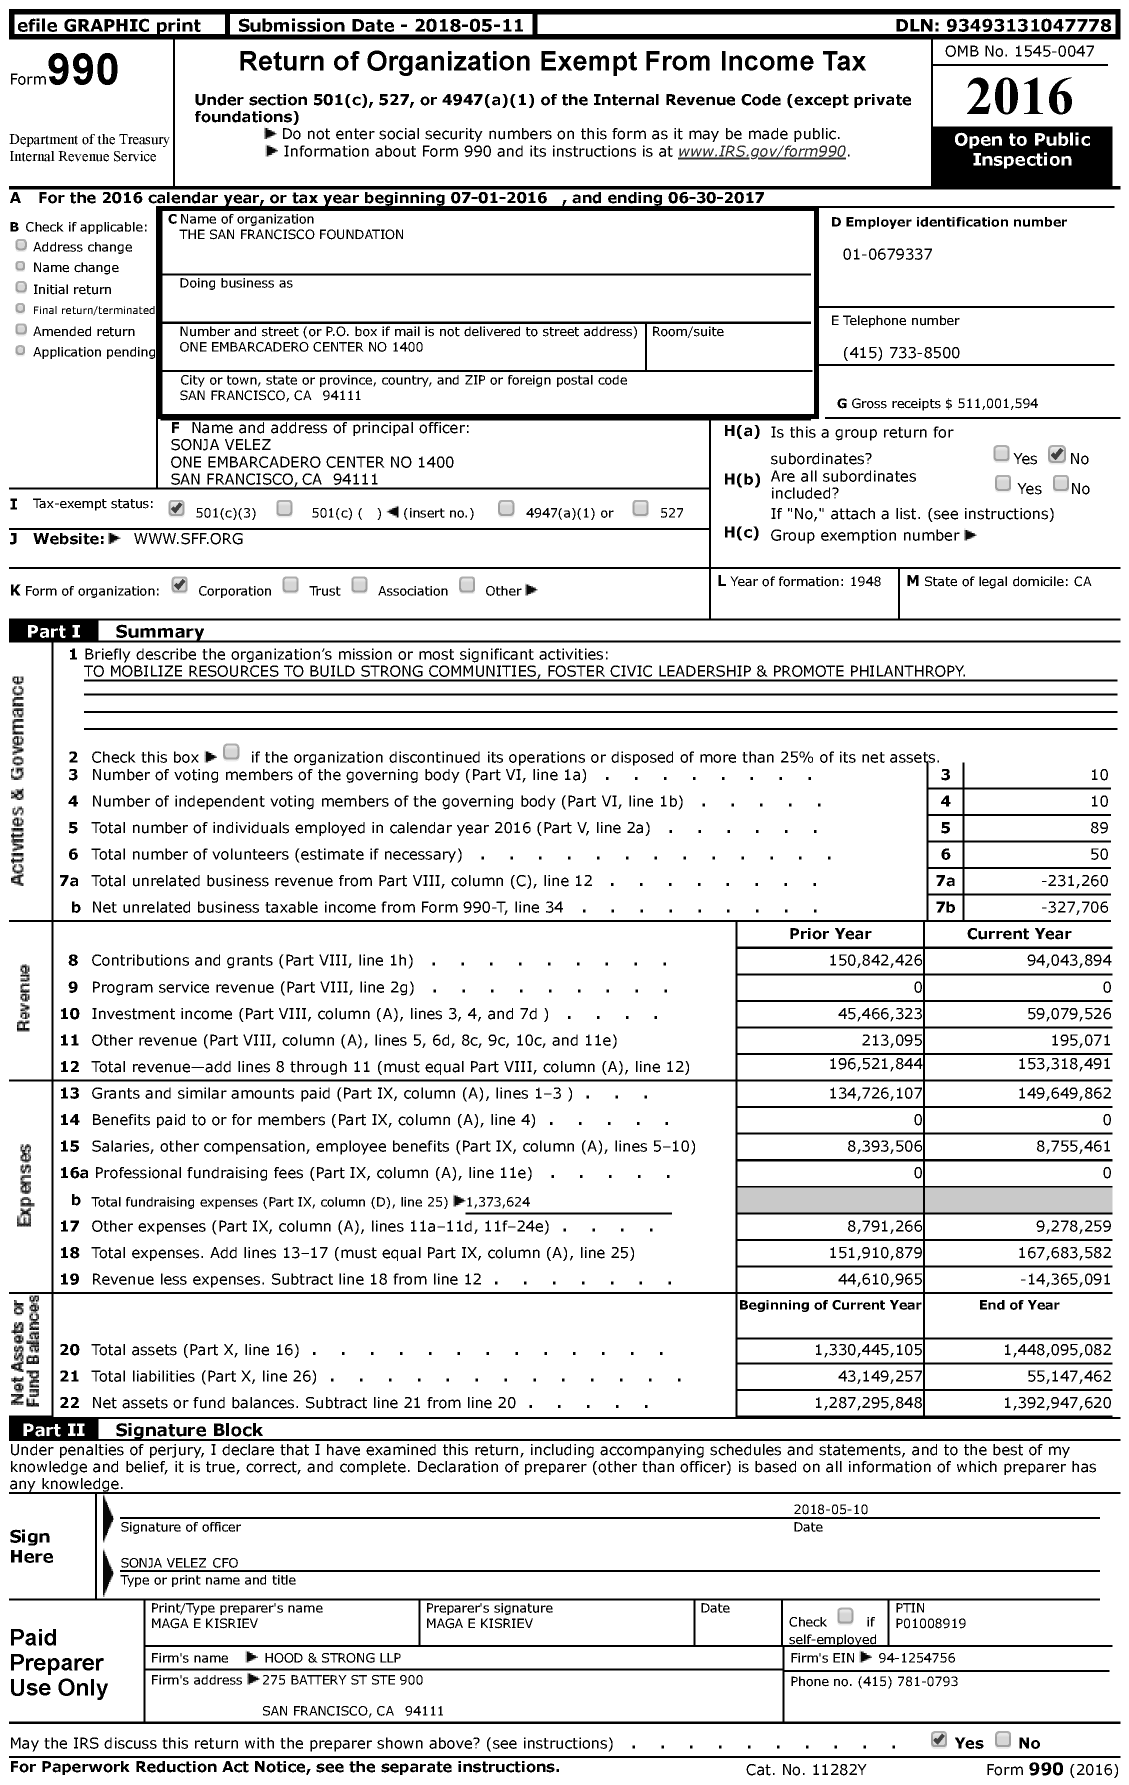 Image of first page of 2016 Form 990 for The San Francisco Foundation (TSFF)